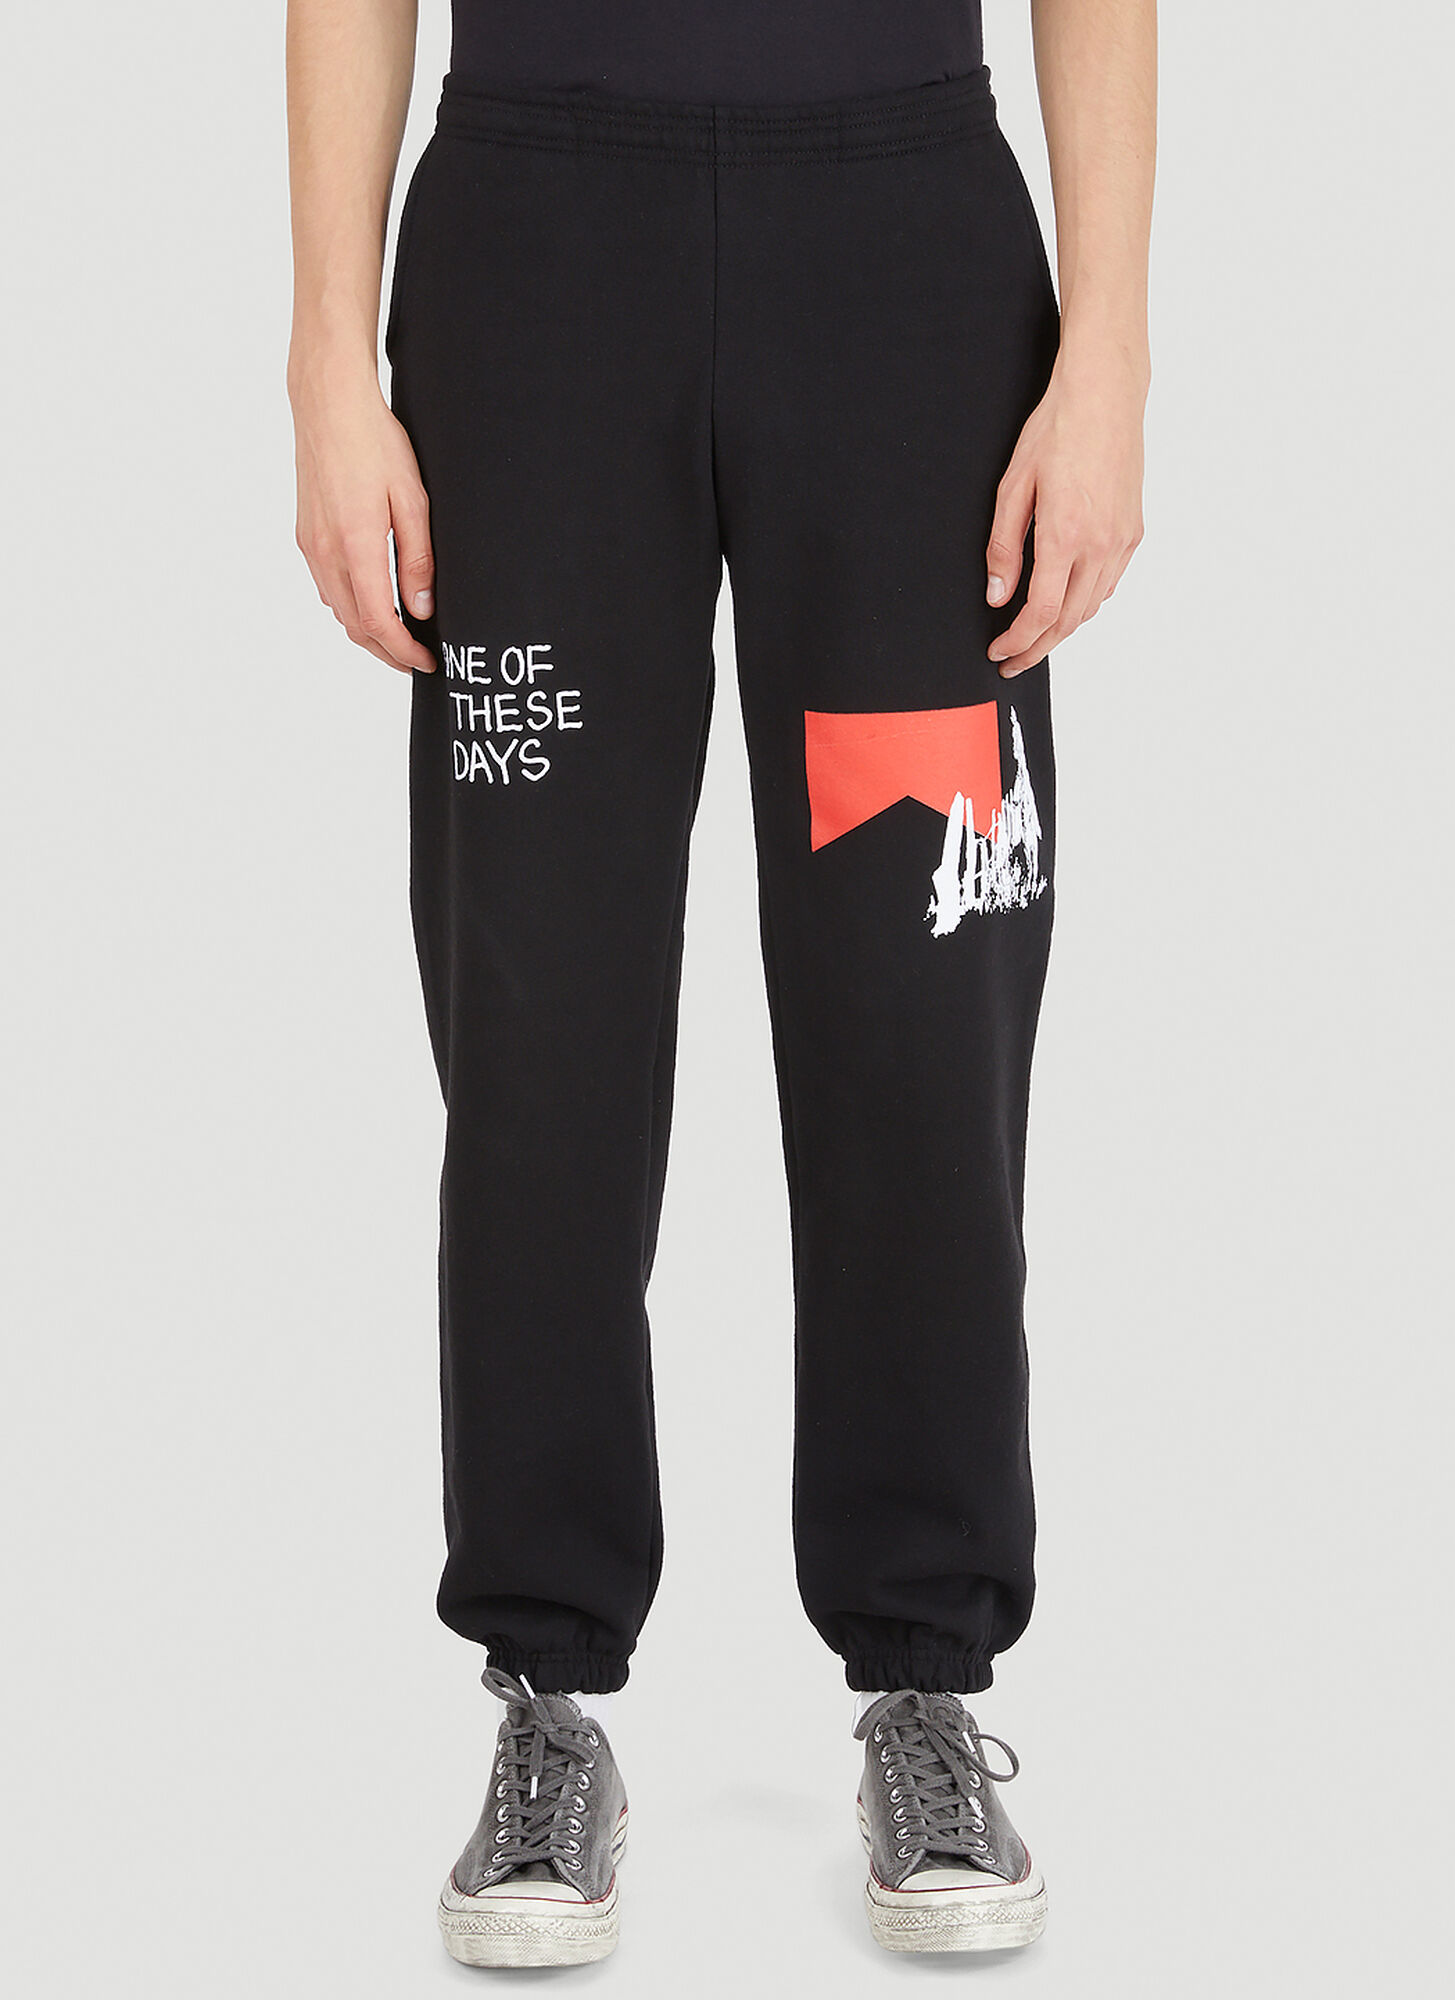 ONE OF THESE DAYS FENCE LINE TRACK PANTS